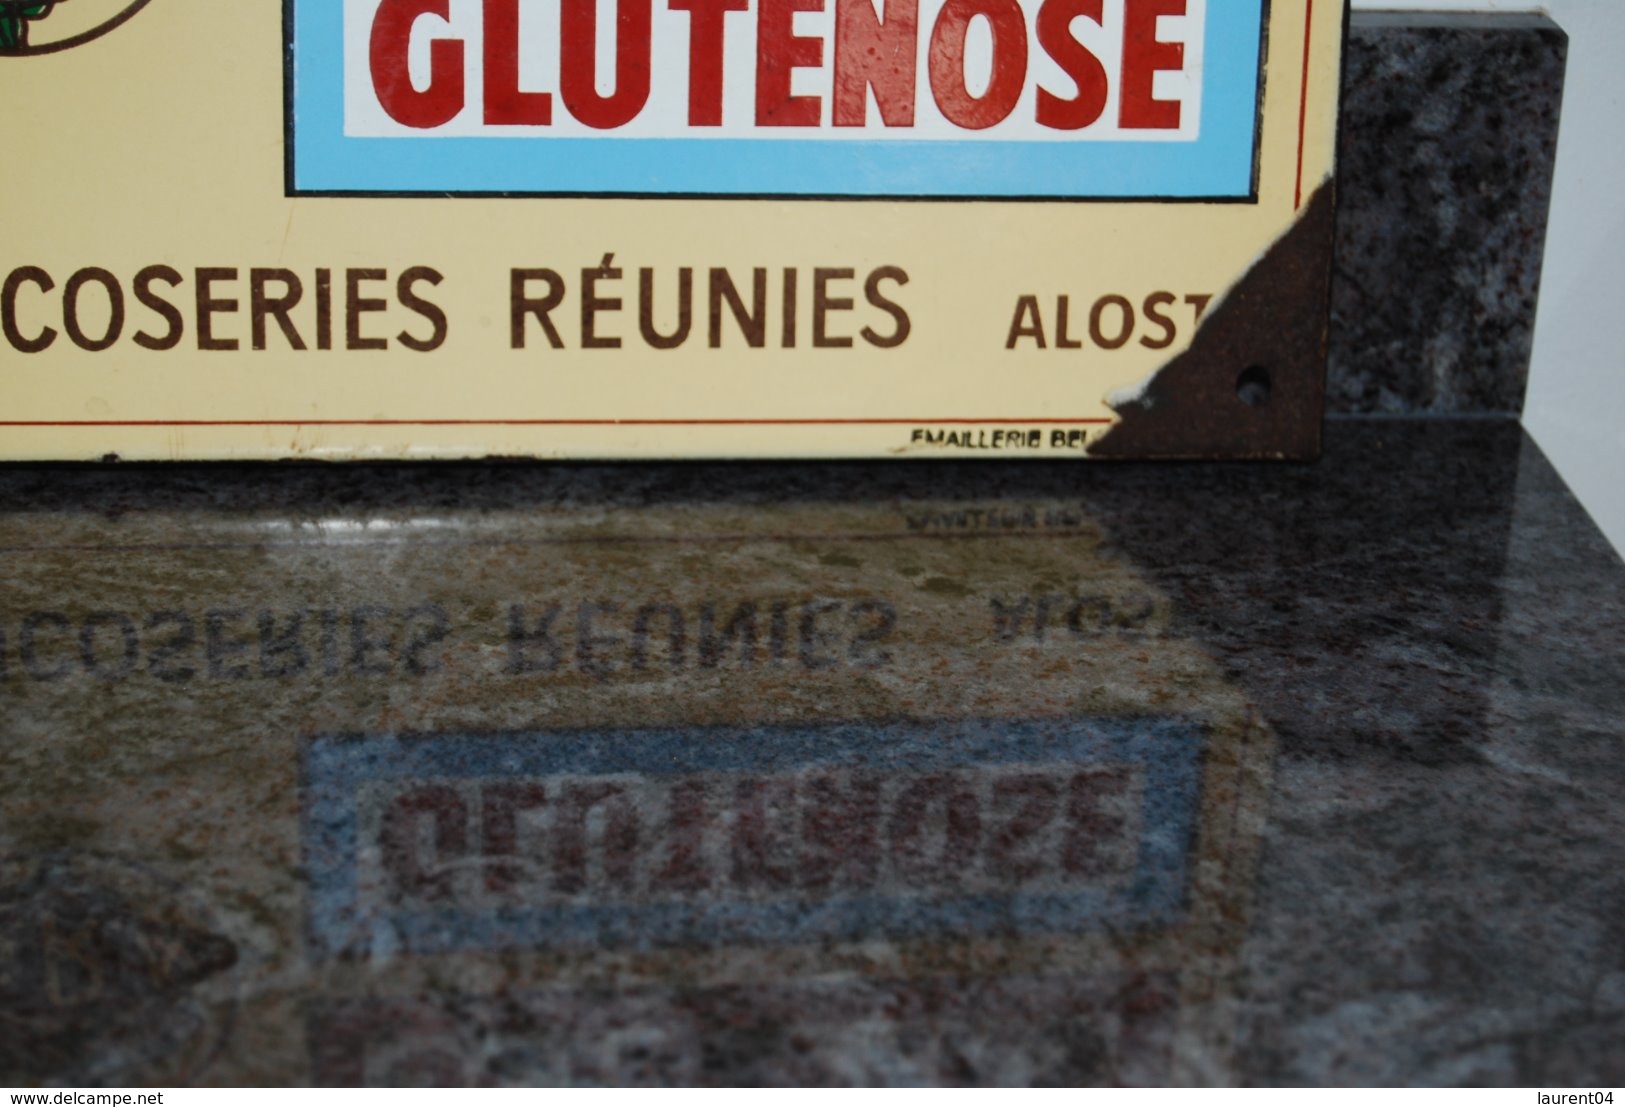 AALST. ALOST . PLAQUE EMAILEE. ALIMENTATION DU BETAIL. S.A. GLUCOSERIES REUNIES. 1950 - Aalst